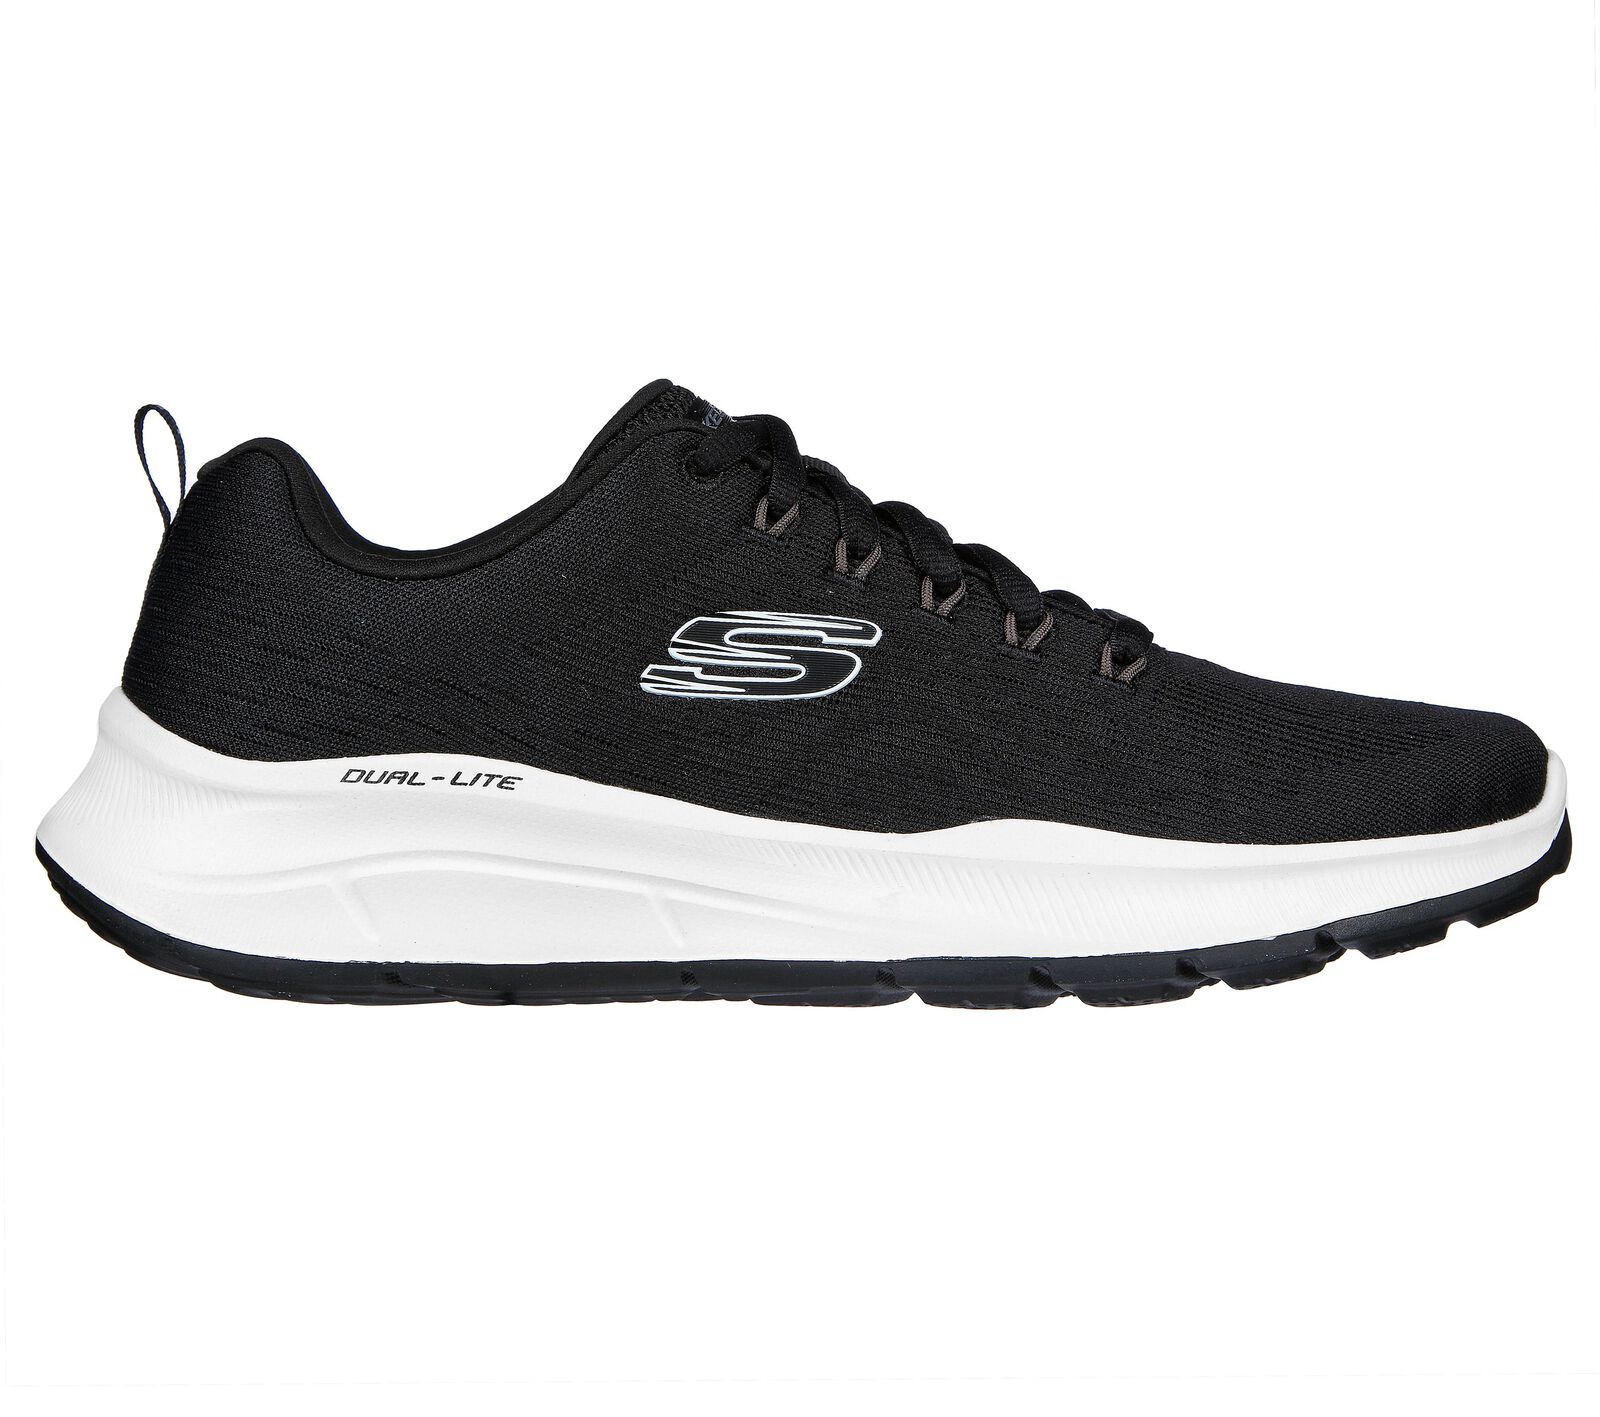 Skechers 232519 Relaxed Fit Equalizer 5.0 Mens Black & White Textile Vegan Lace Up Trainers